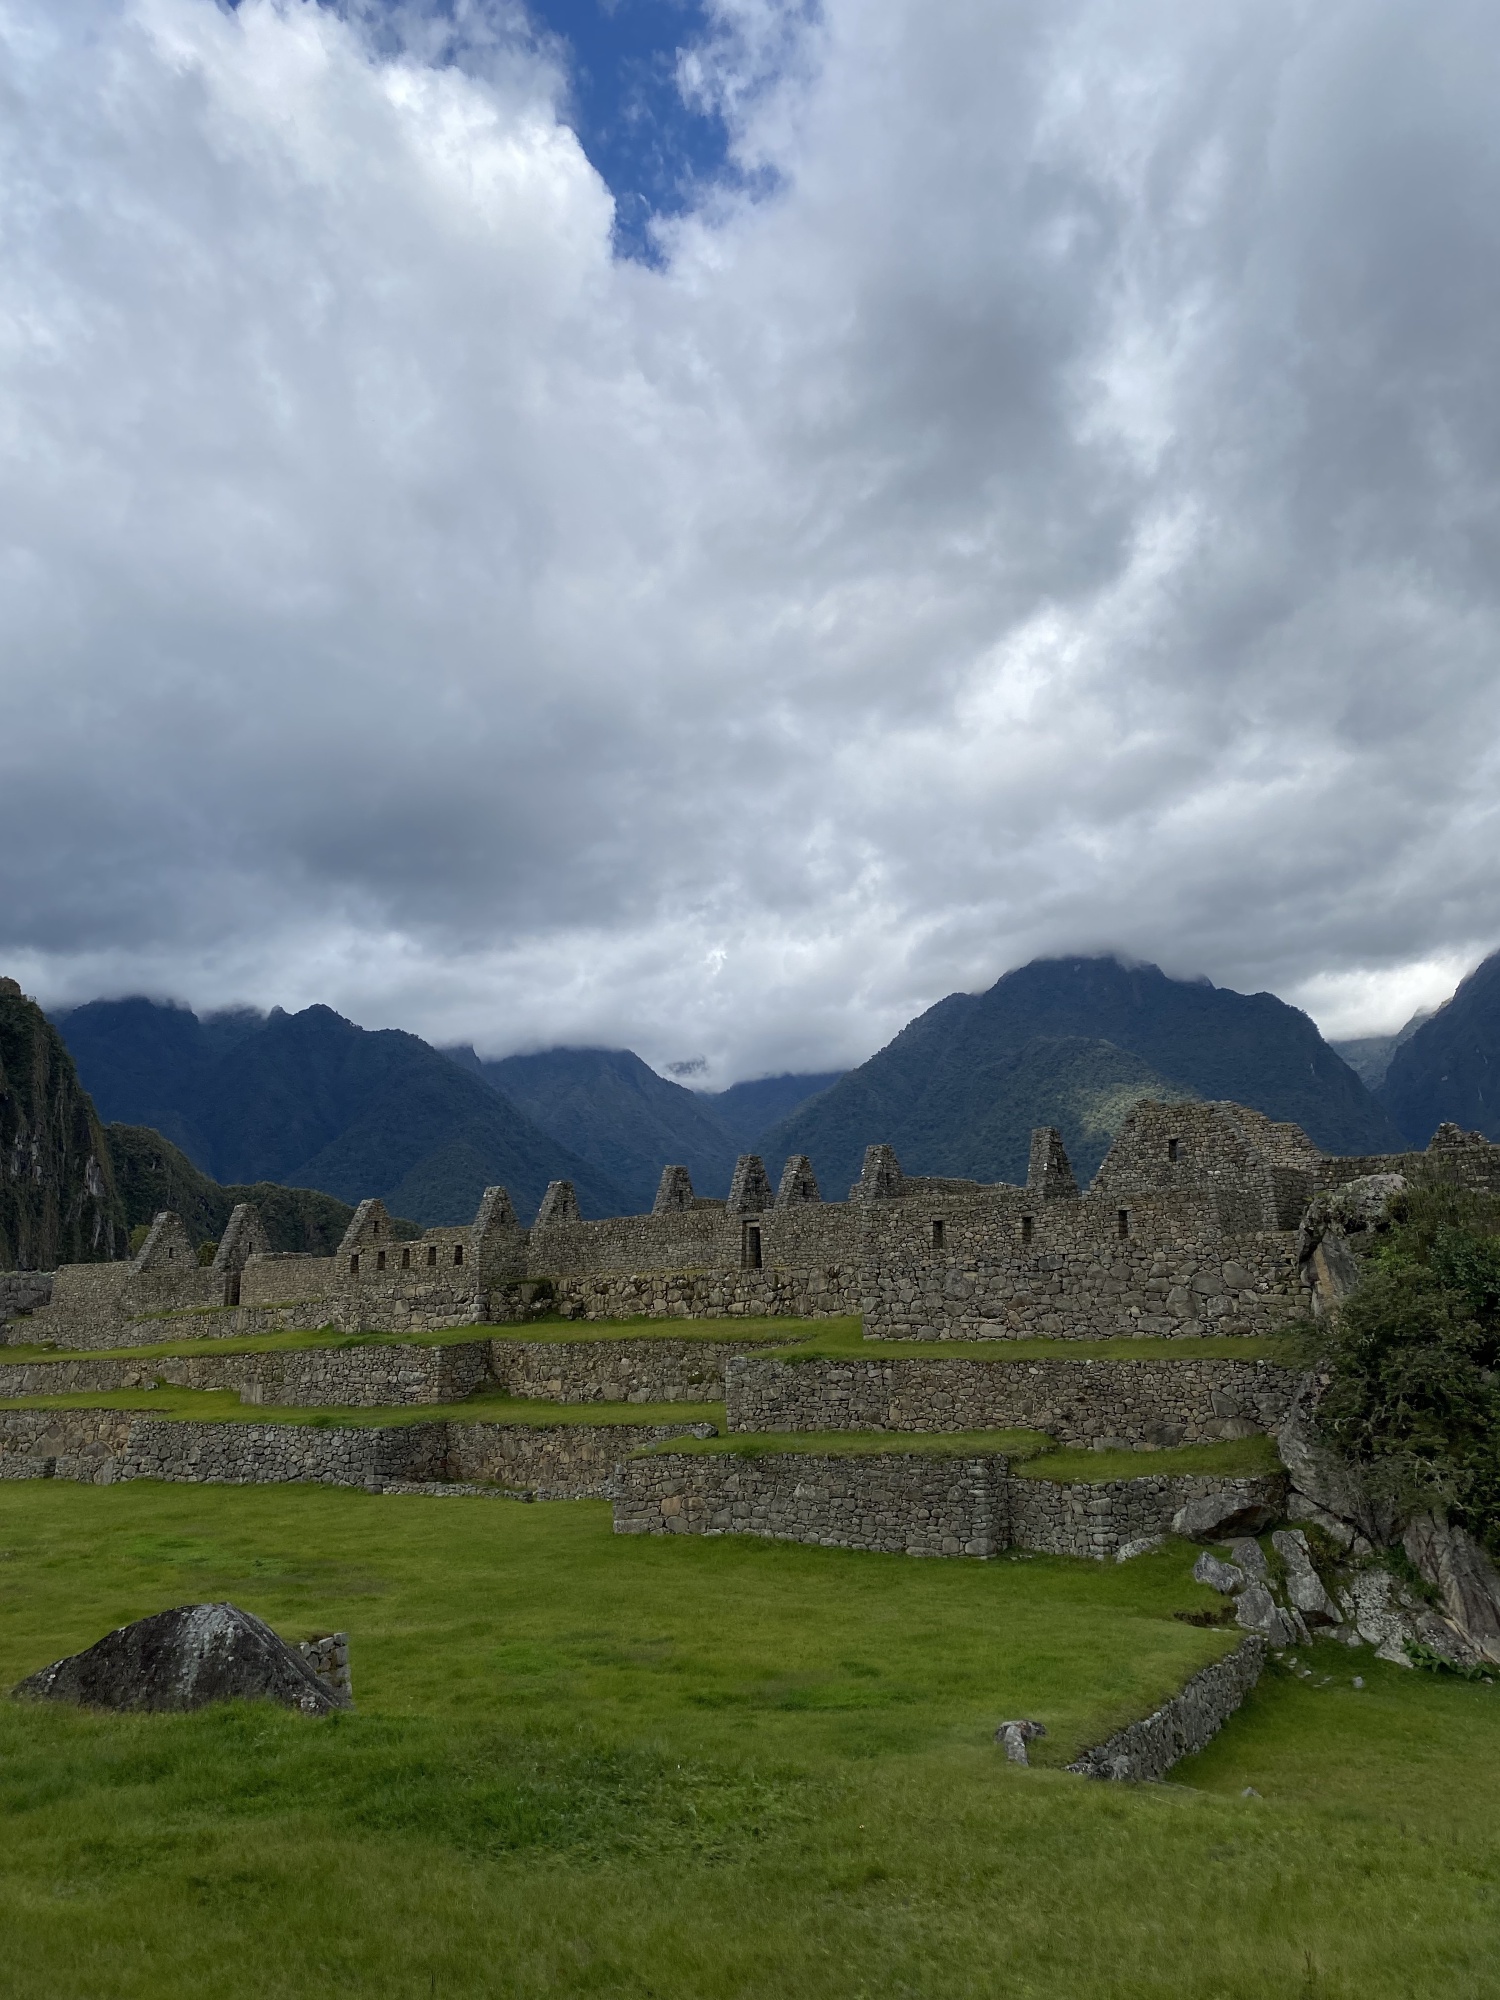 Imagine living here undisturbed, then the Spaniards are conquering Peru... So Machu Picchu decided to leave this place to protect it...